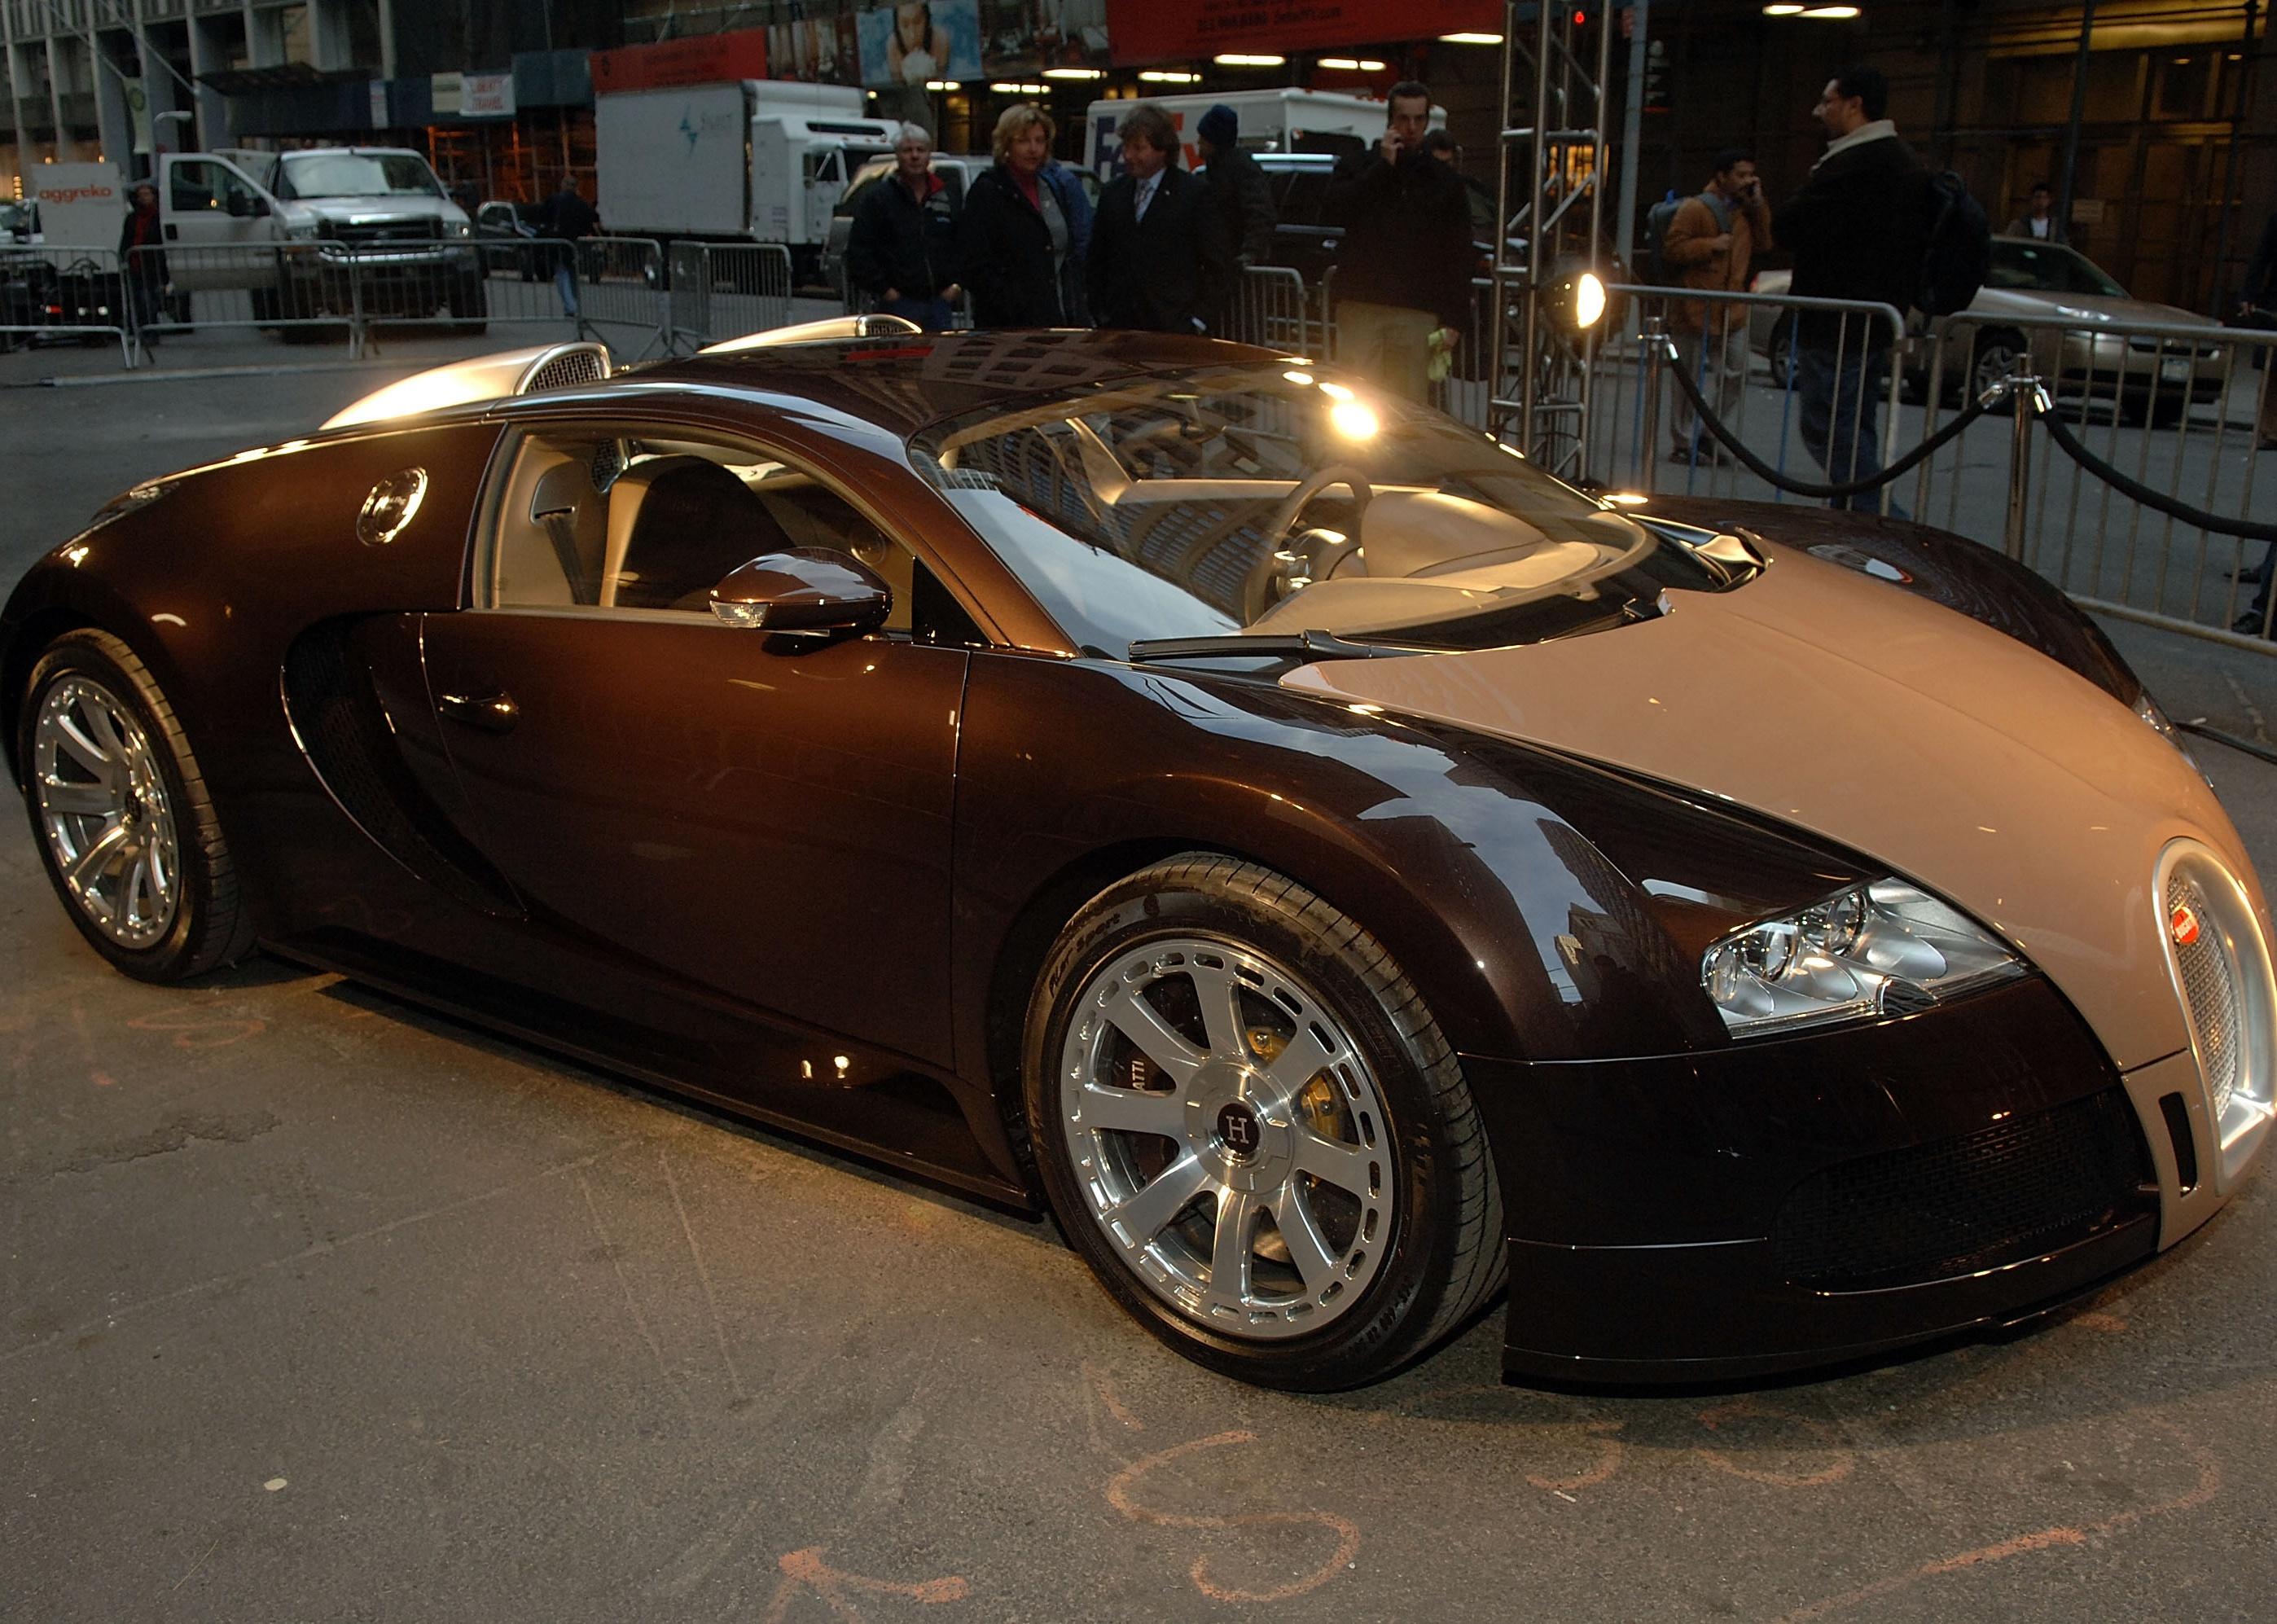 Detail of the Bugatti Veyron FGB during the debut of the Bugatti Veyron FBG.